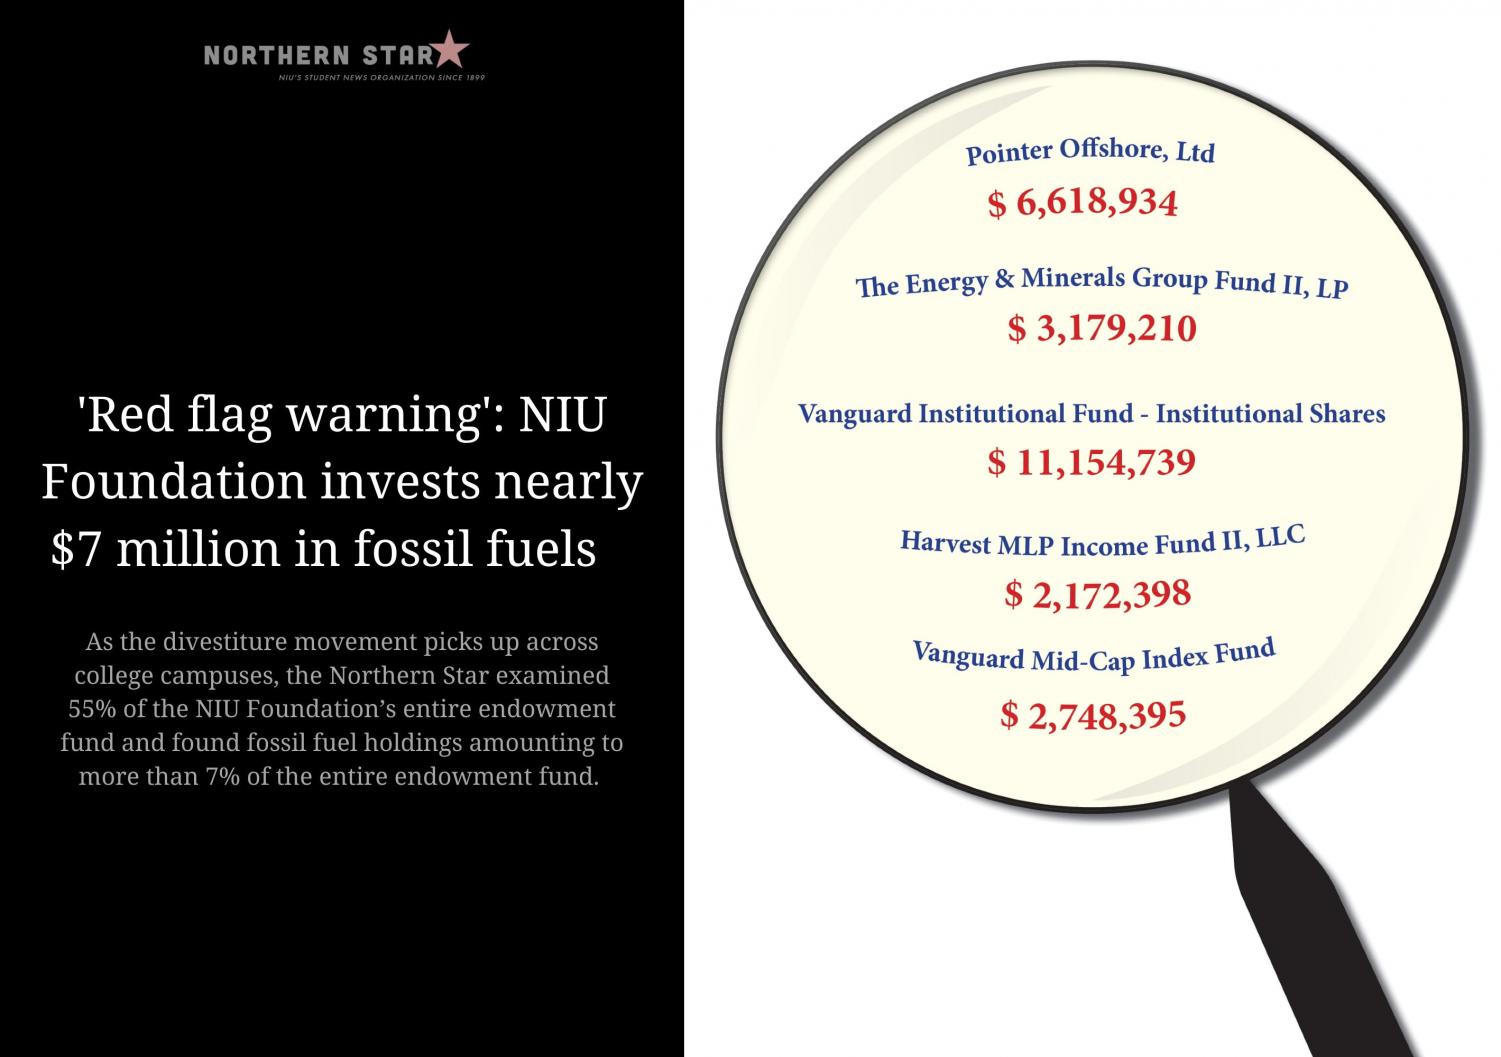 ‘Red flag warning’: NIU Foundation invests nearly $7 million in fossil fuels